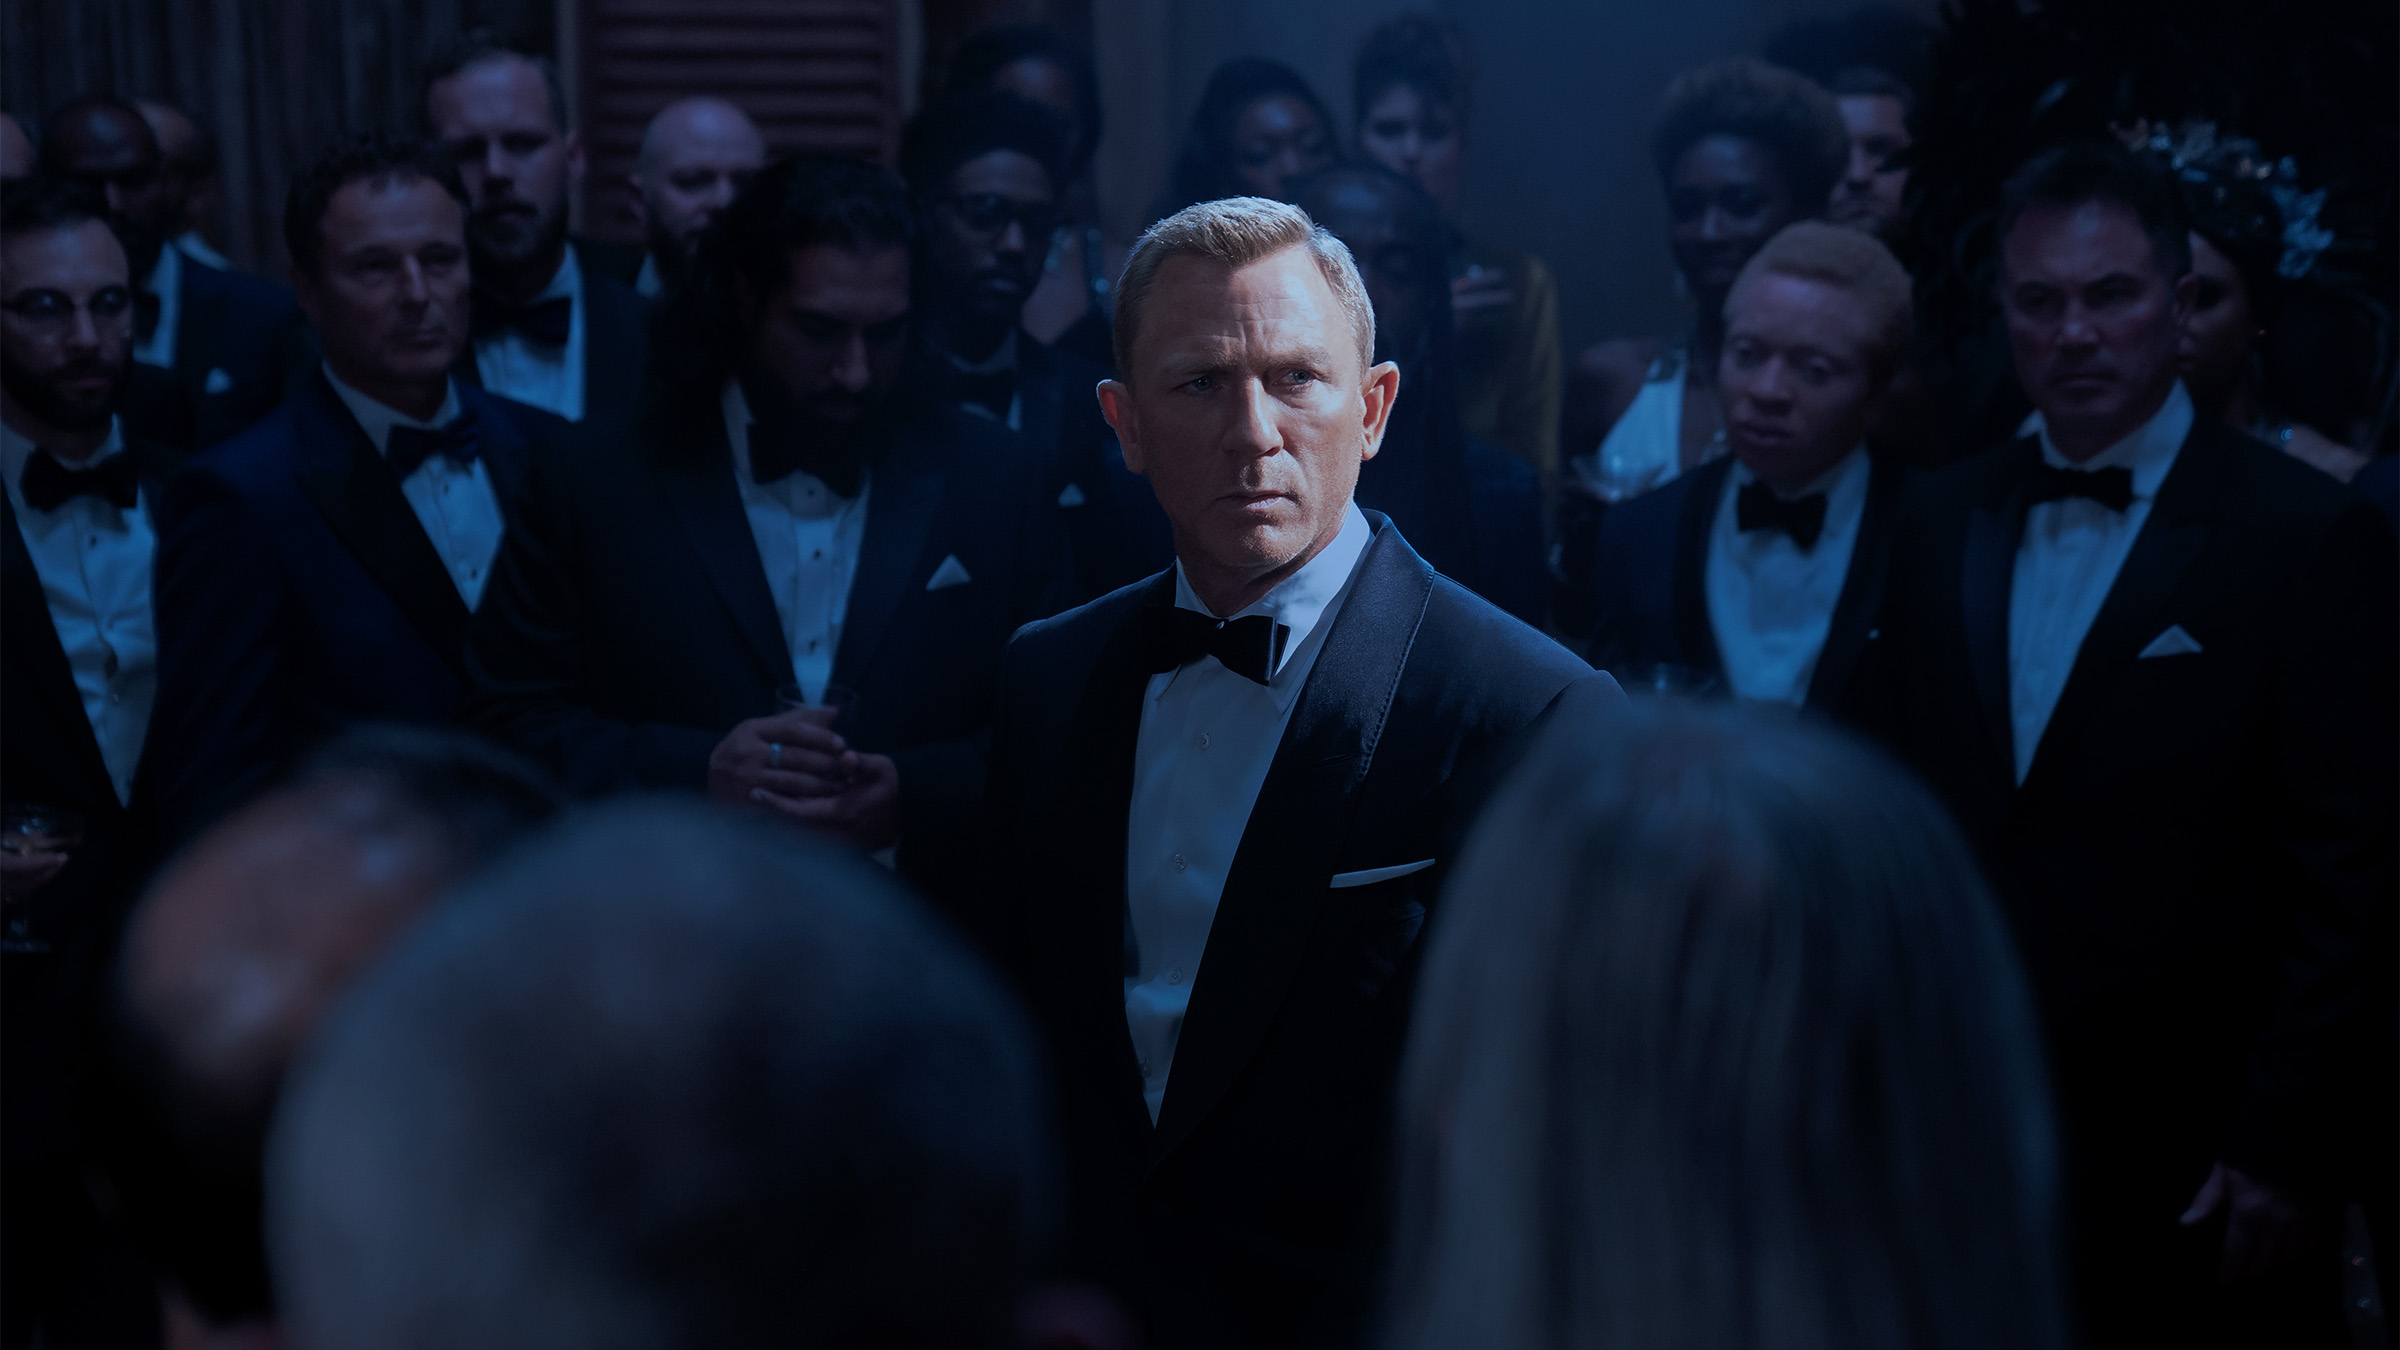 Art of the Cut: Saying “Goodbye, Mr. Bond” to Daniel Craig in “No Time to Die”